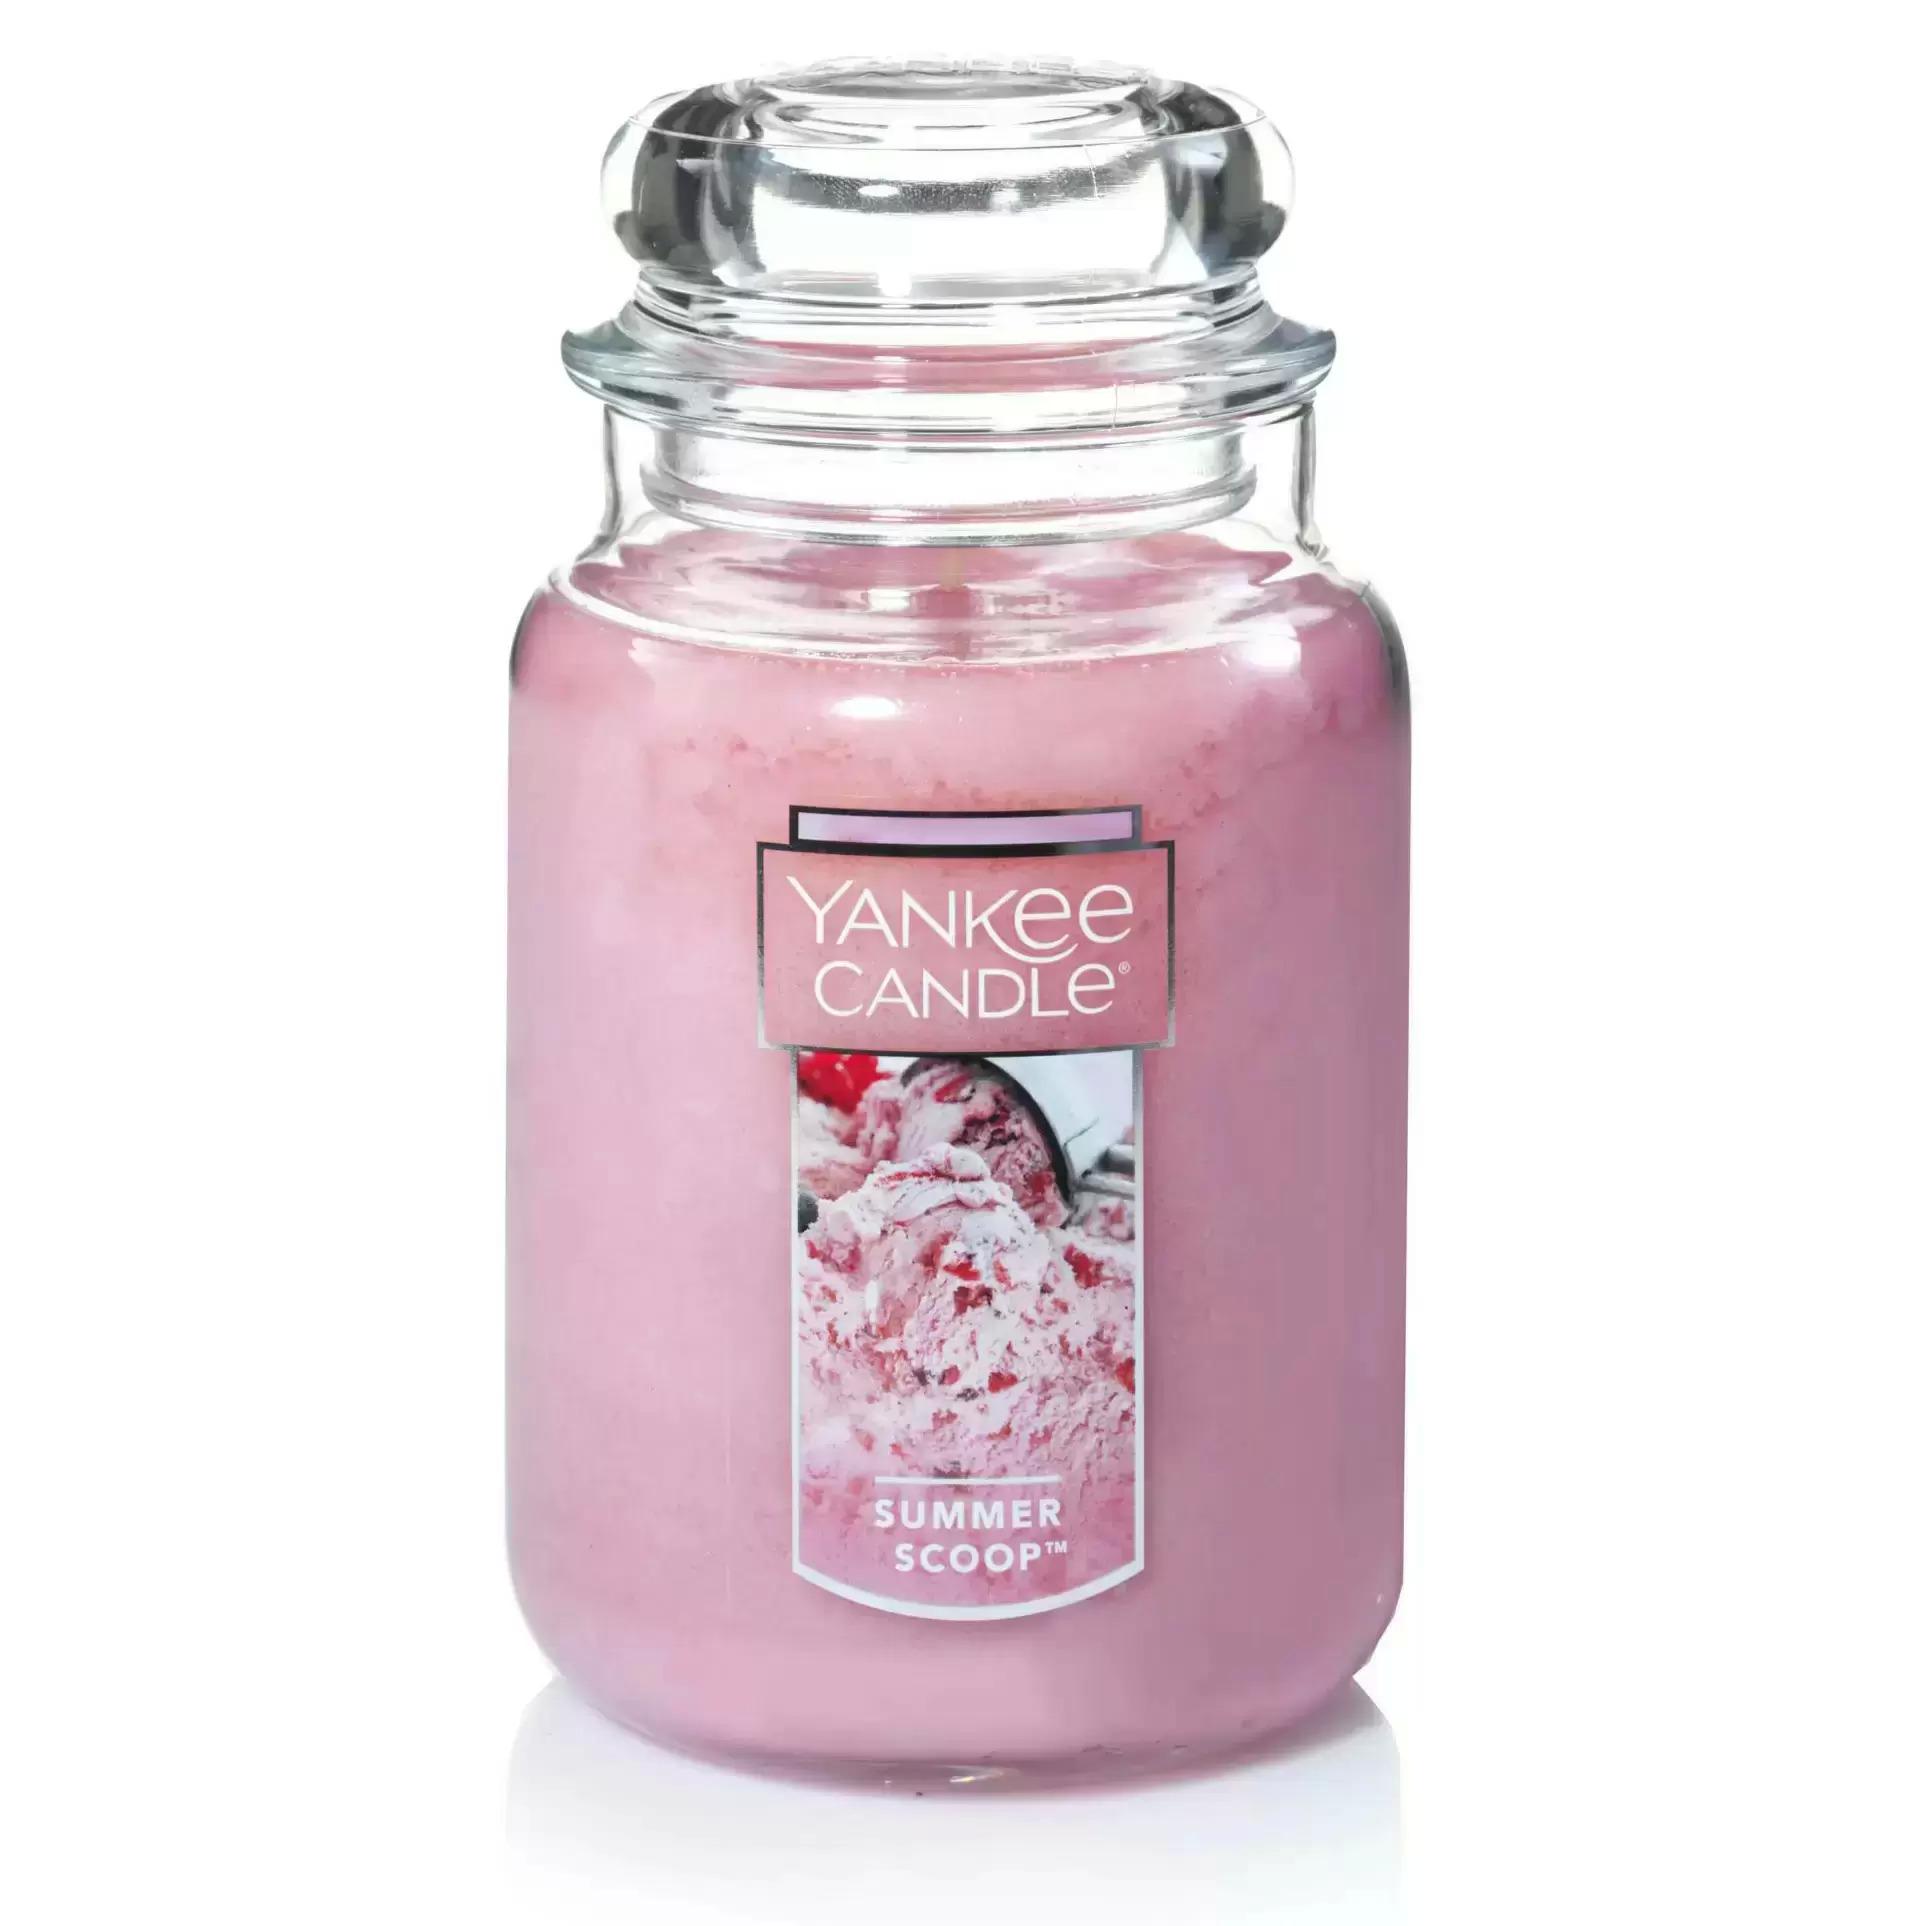 Yankee Candle Original Large Jar Candles 7 Sets for $58.50 Shipped